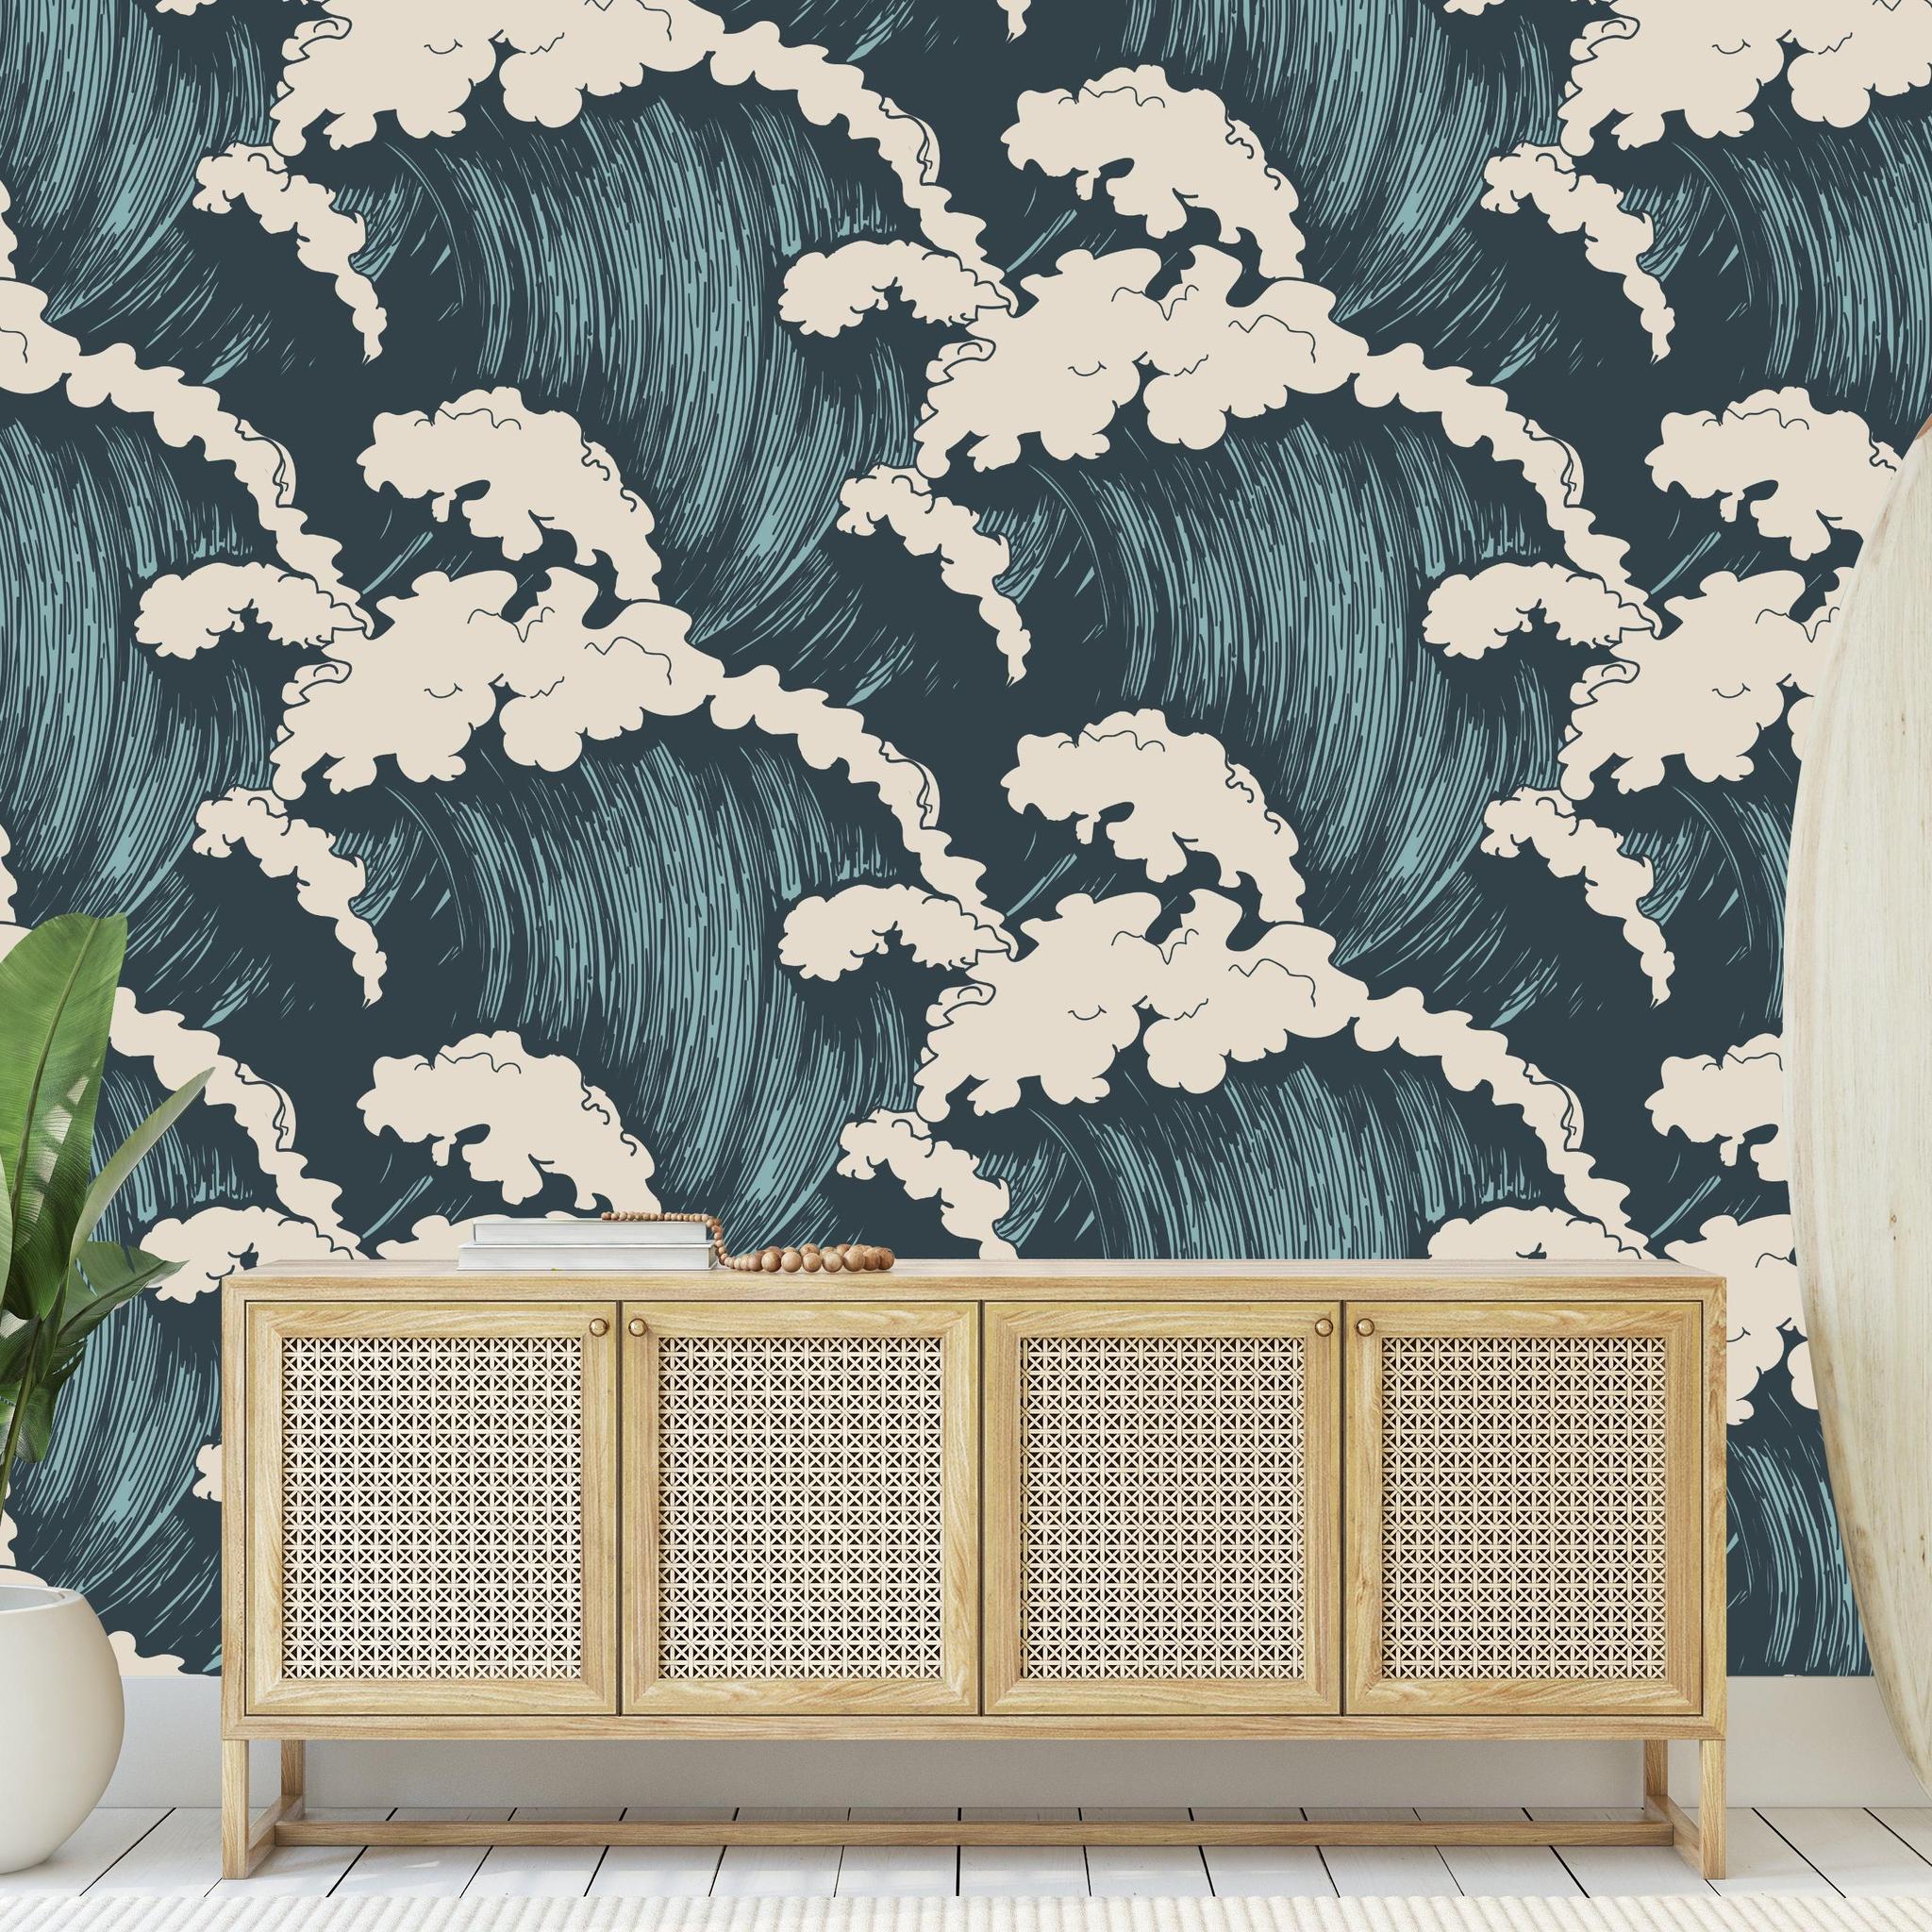 Maverick Wallpaper by Wall Blush SG02 in a modern living room, featuring an accent wall with a distinctive blue and white cloud pattern.
